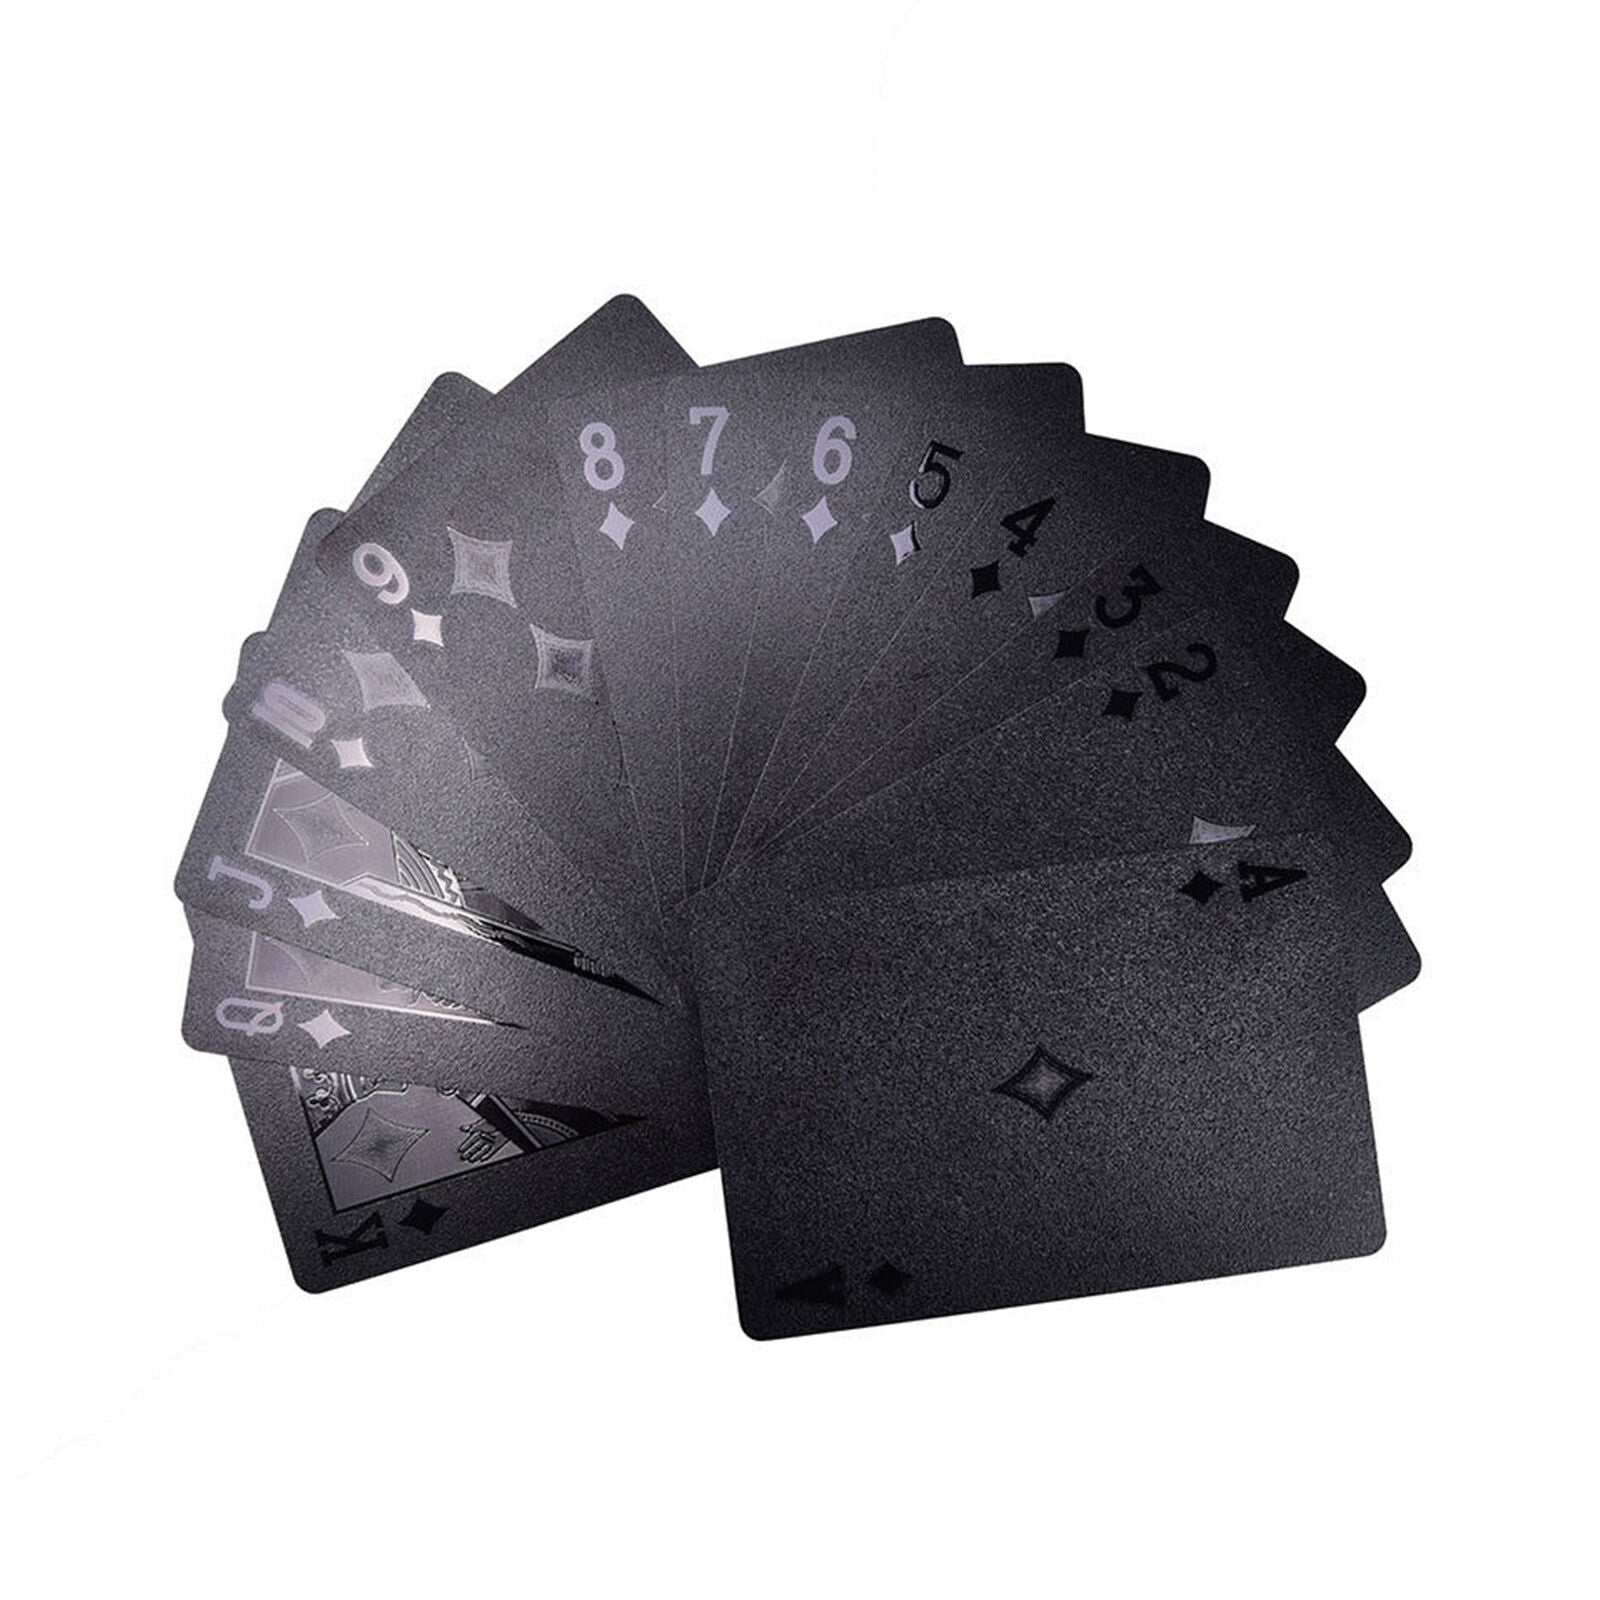 Black Playing Cards Deck Frosting Black Diamond Poker Waterproof Limited Edition